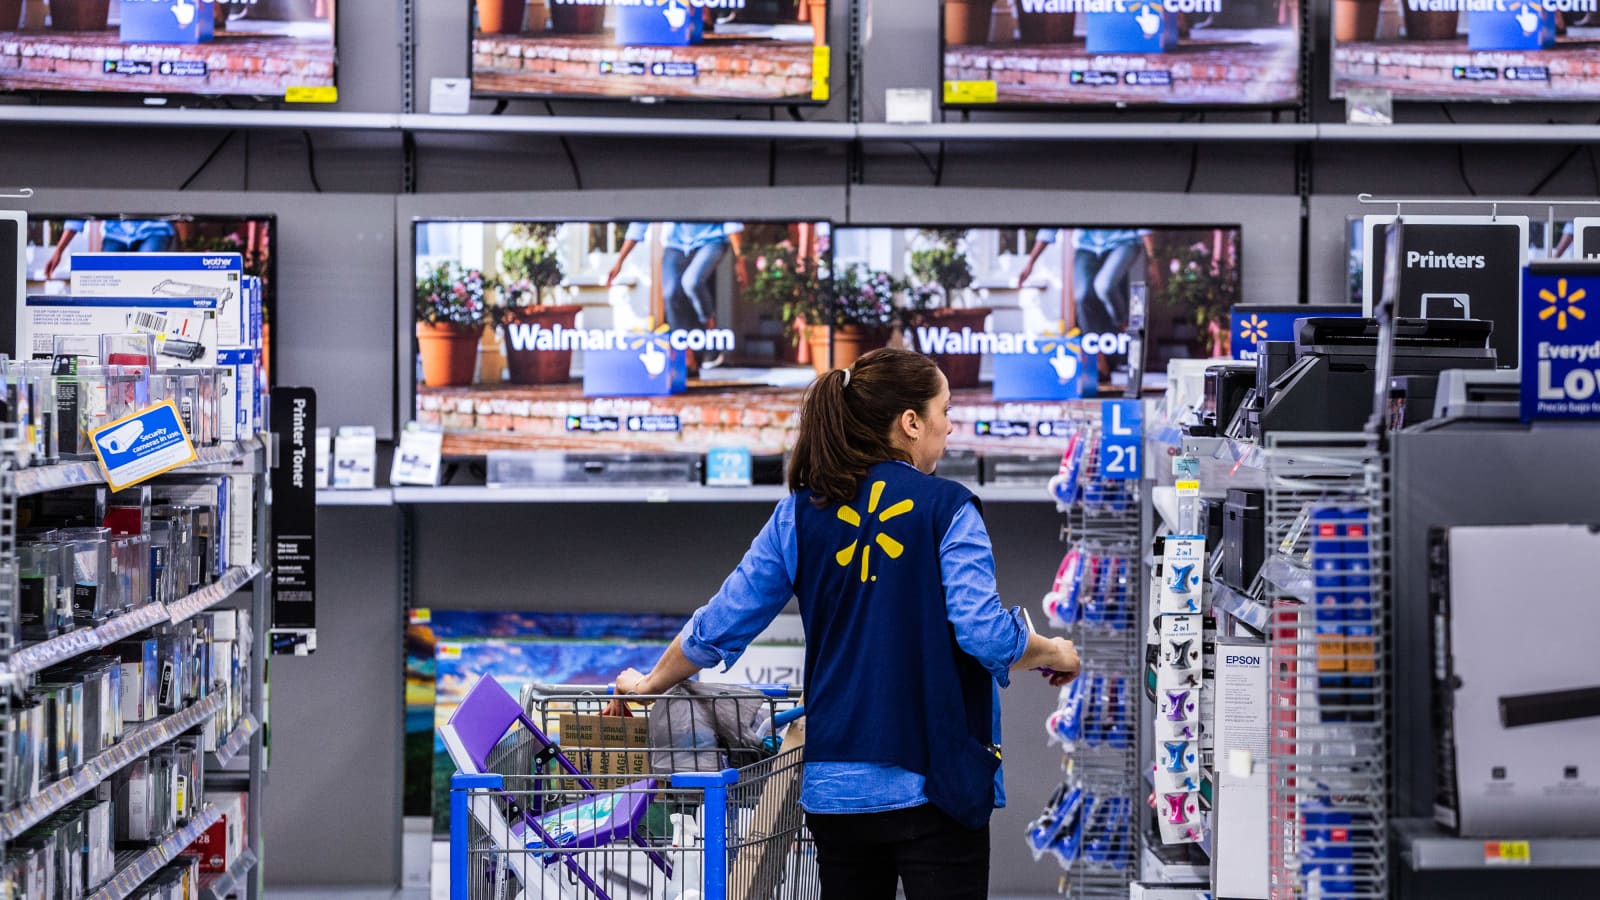 Walmart Team Lead Position (Duties, Pay, Is It A Hard Job + More)